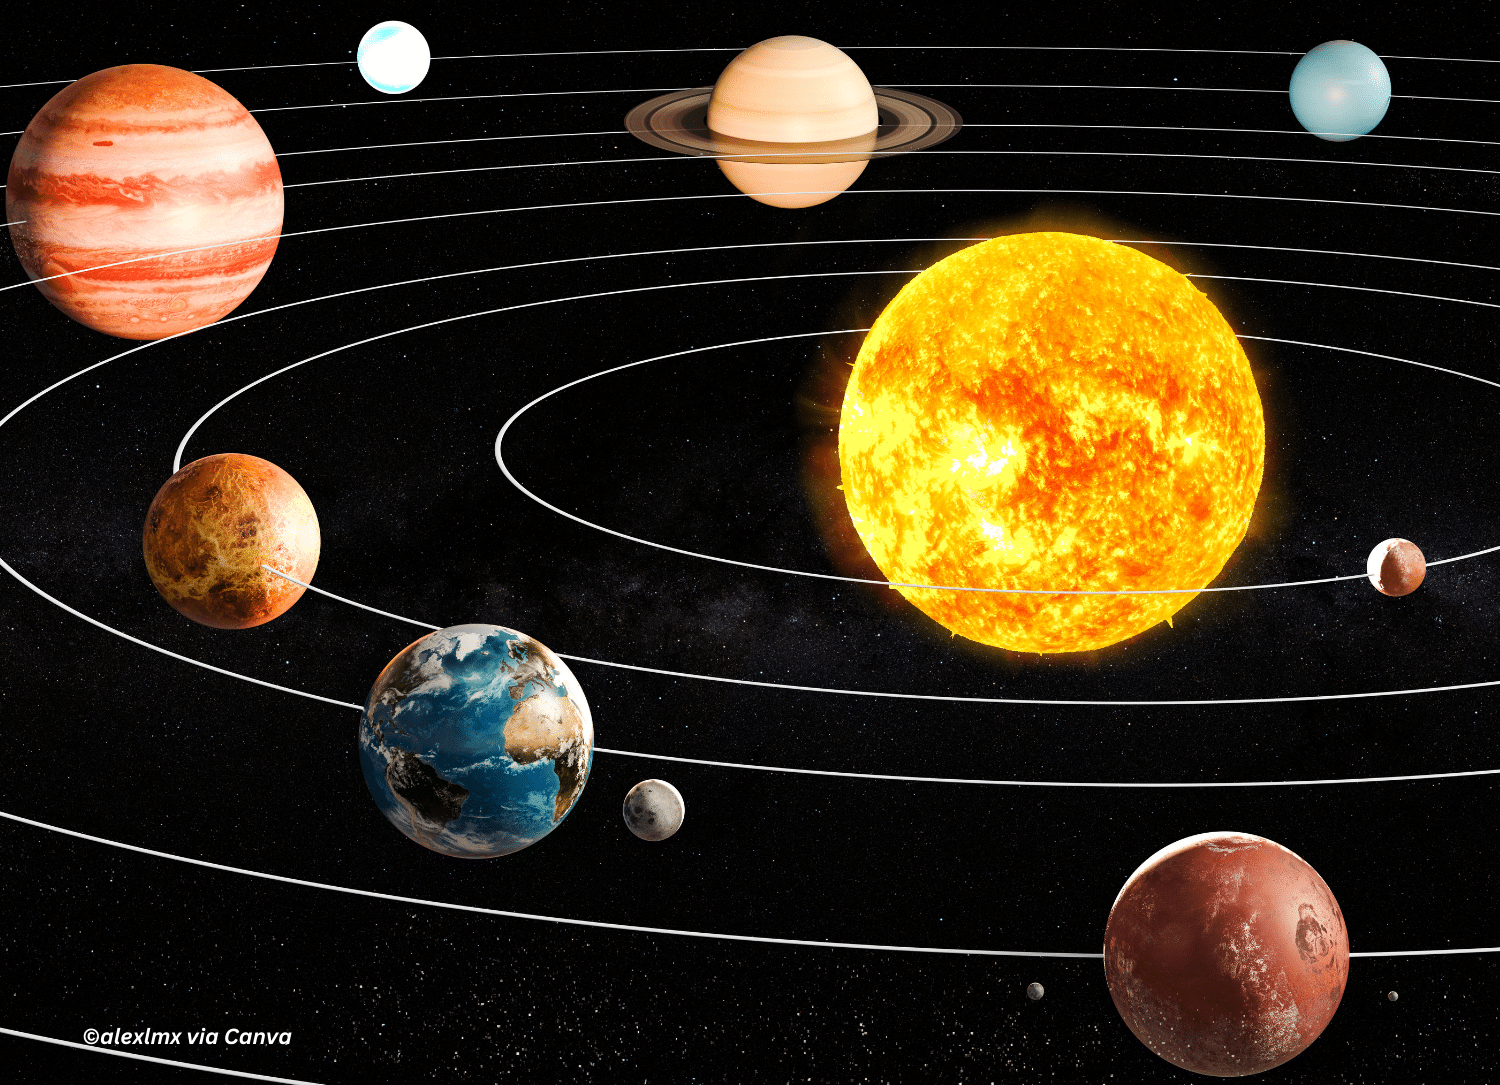 horizontal image of the planets in our solar system